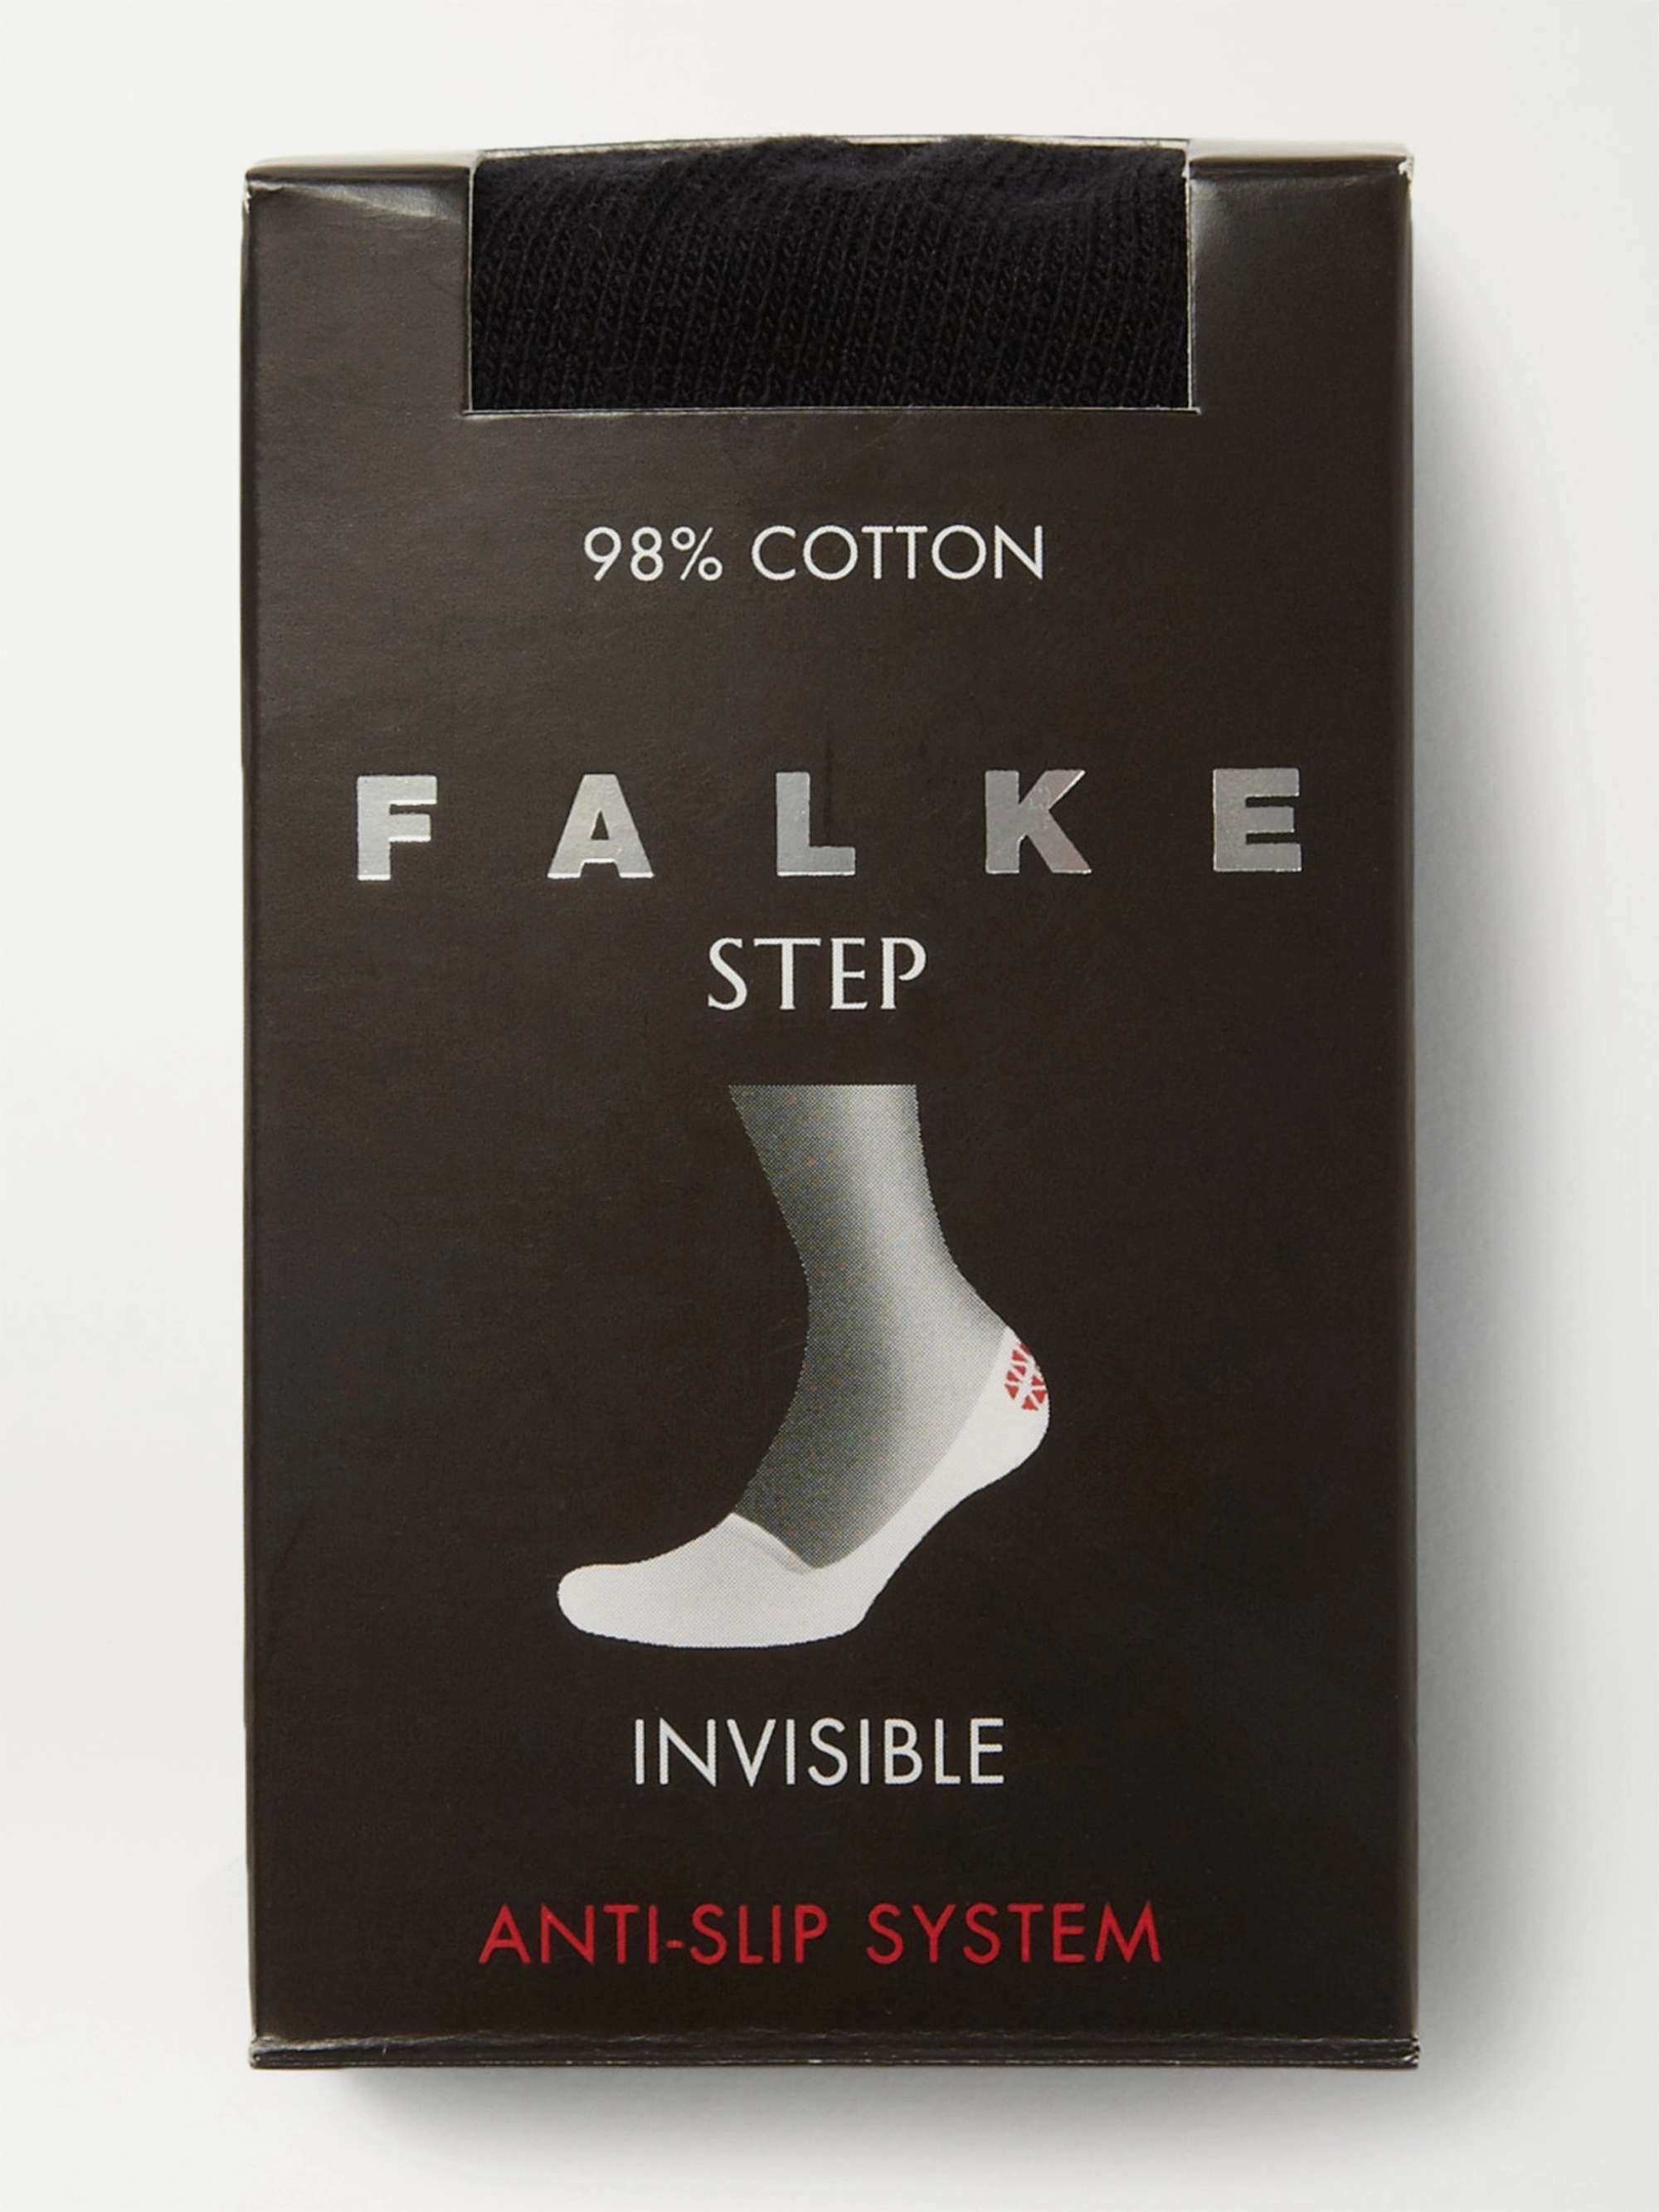 FALKE Men's Invisible Step Liner Socks Cotton Black White More Colours No Show Hidden In Shoe Low Cut Sock Footsies For Summer With Anti Slip System 1 Pair